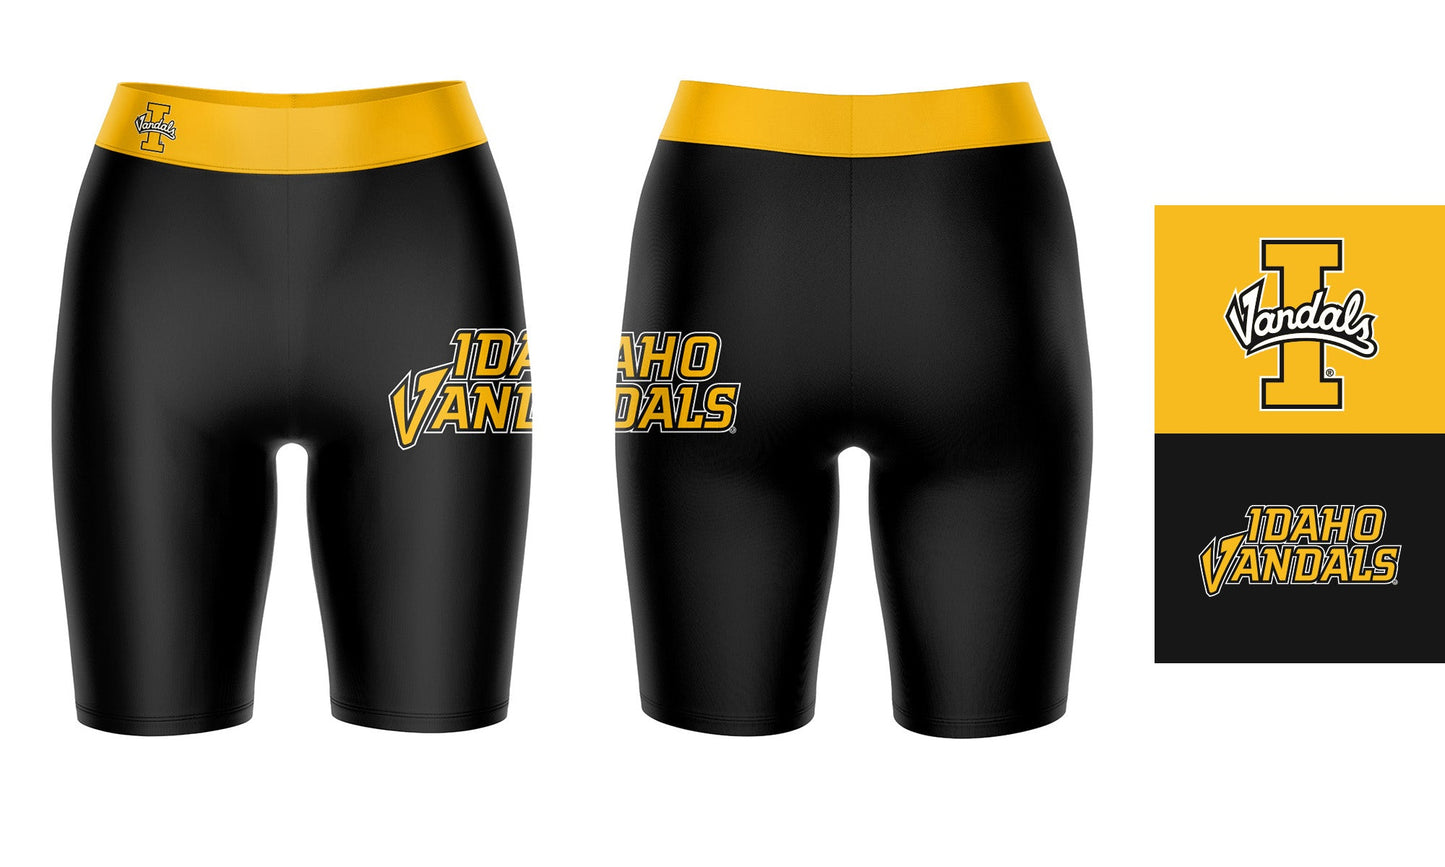 Idaho Vandals Vive La Fete Game Day Logo on Thigh and Waistband Black and Gold Women Bike Short 9 Inseam"